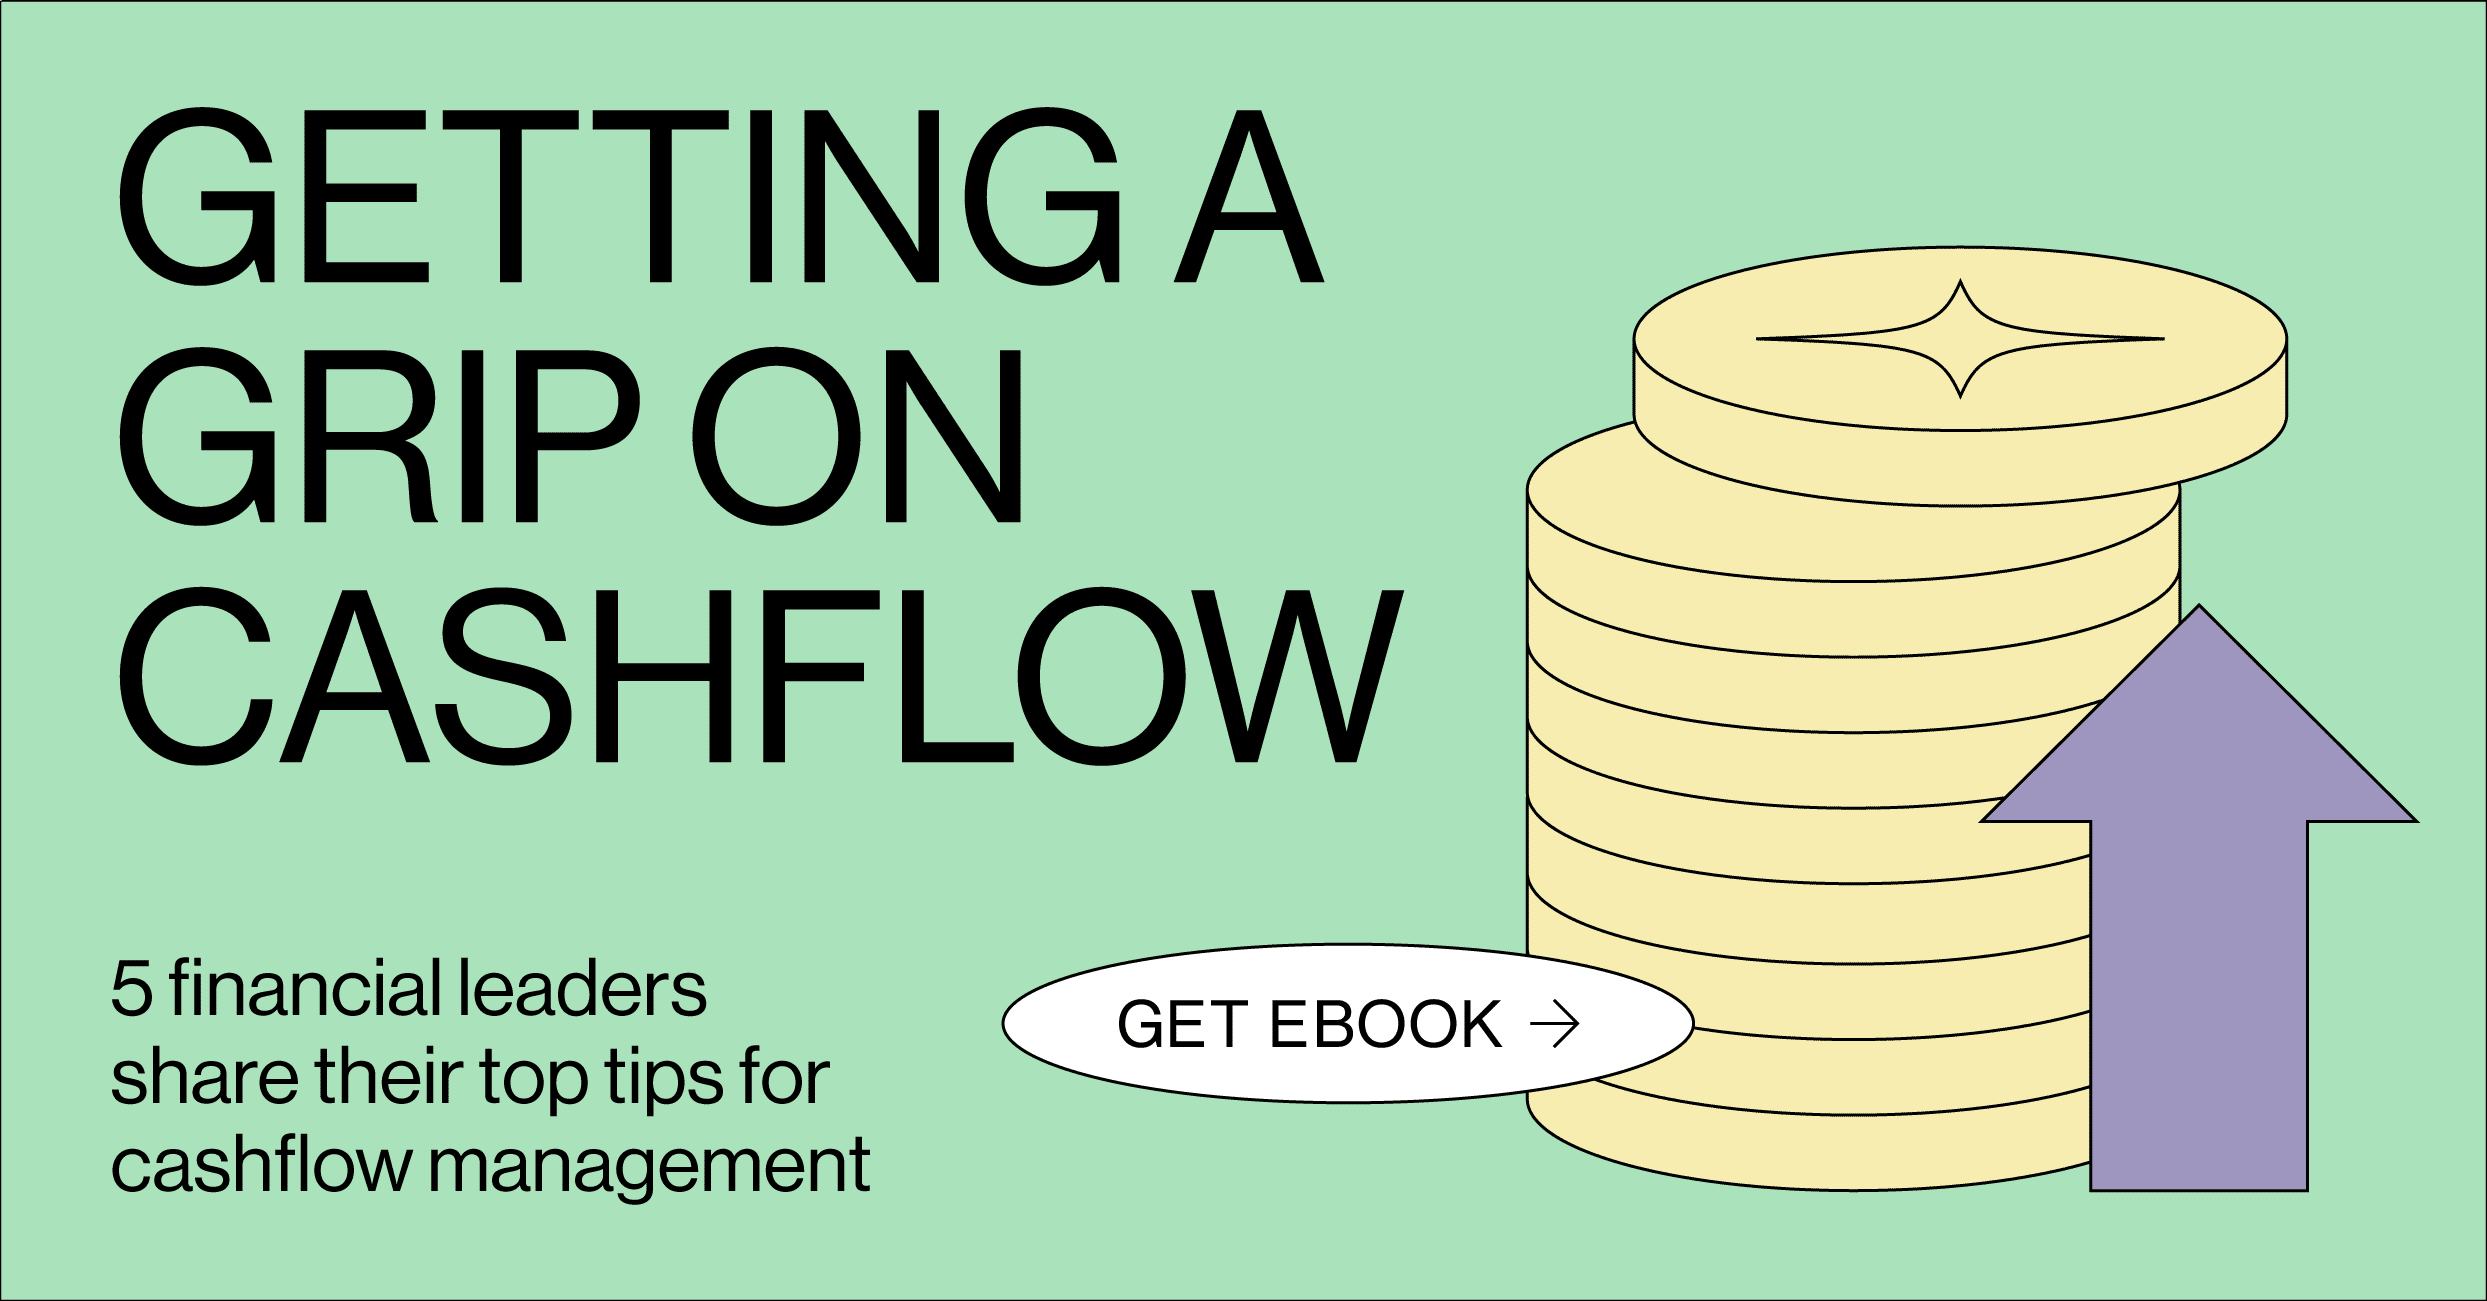 Link to Getting a grip on cashflow eBook landing page